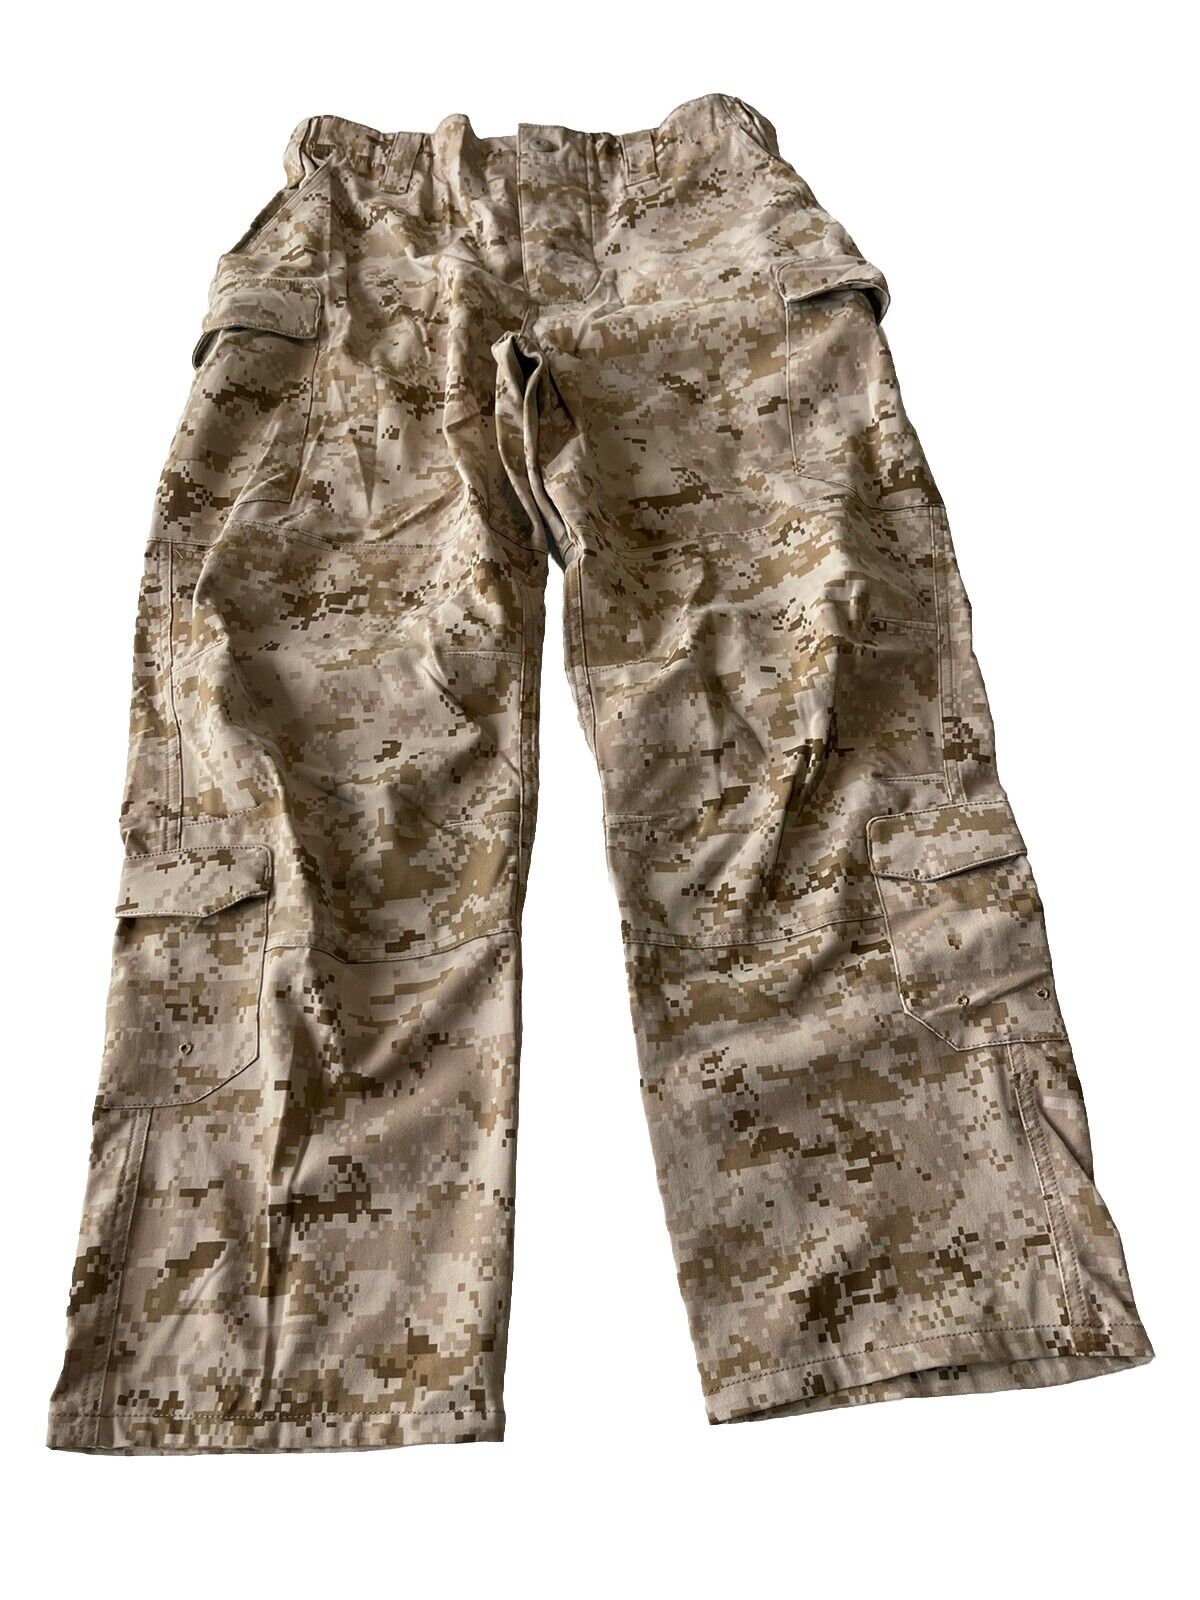 Beyond Clothing AOR1 L9 Large All Weather Stretch Mission Pant SOCOM CAG MARSOC